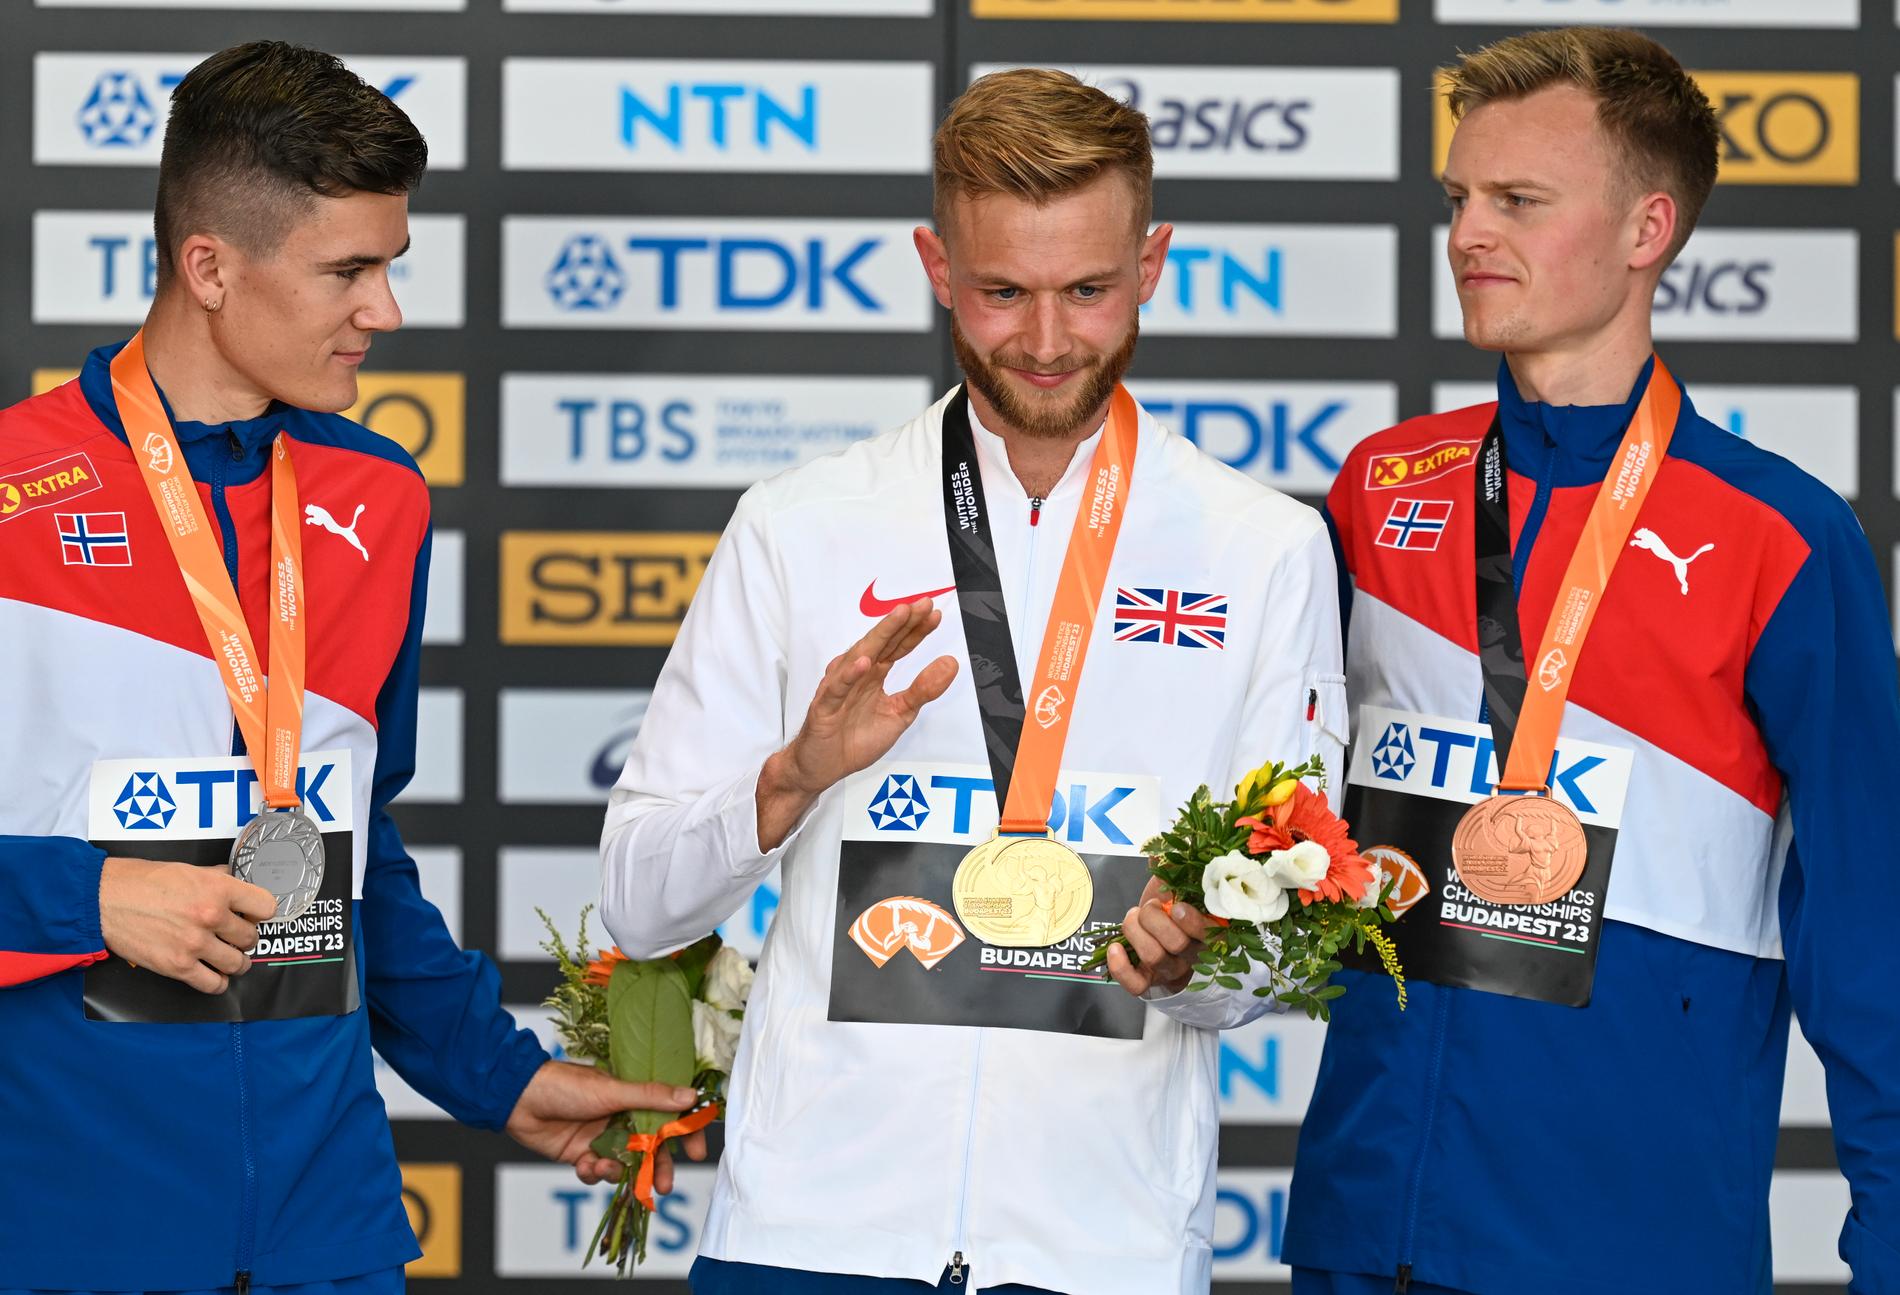 On the podium: Narvi Gilge Nordas (right) on the victory podium in the WC with Jakob Ingebrigtsen and world champion Josh Kerr.